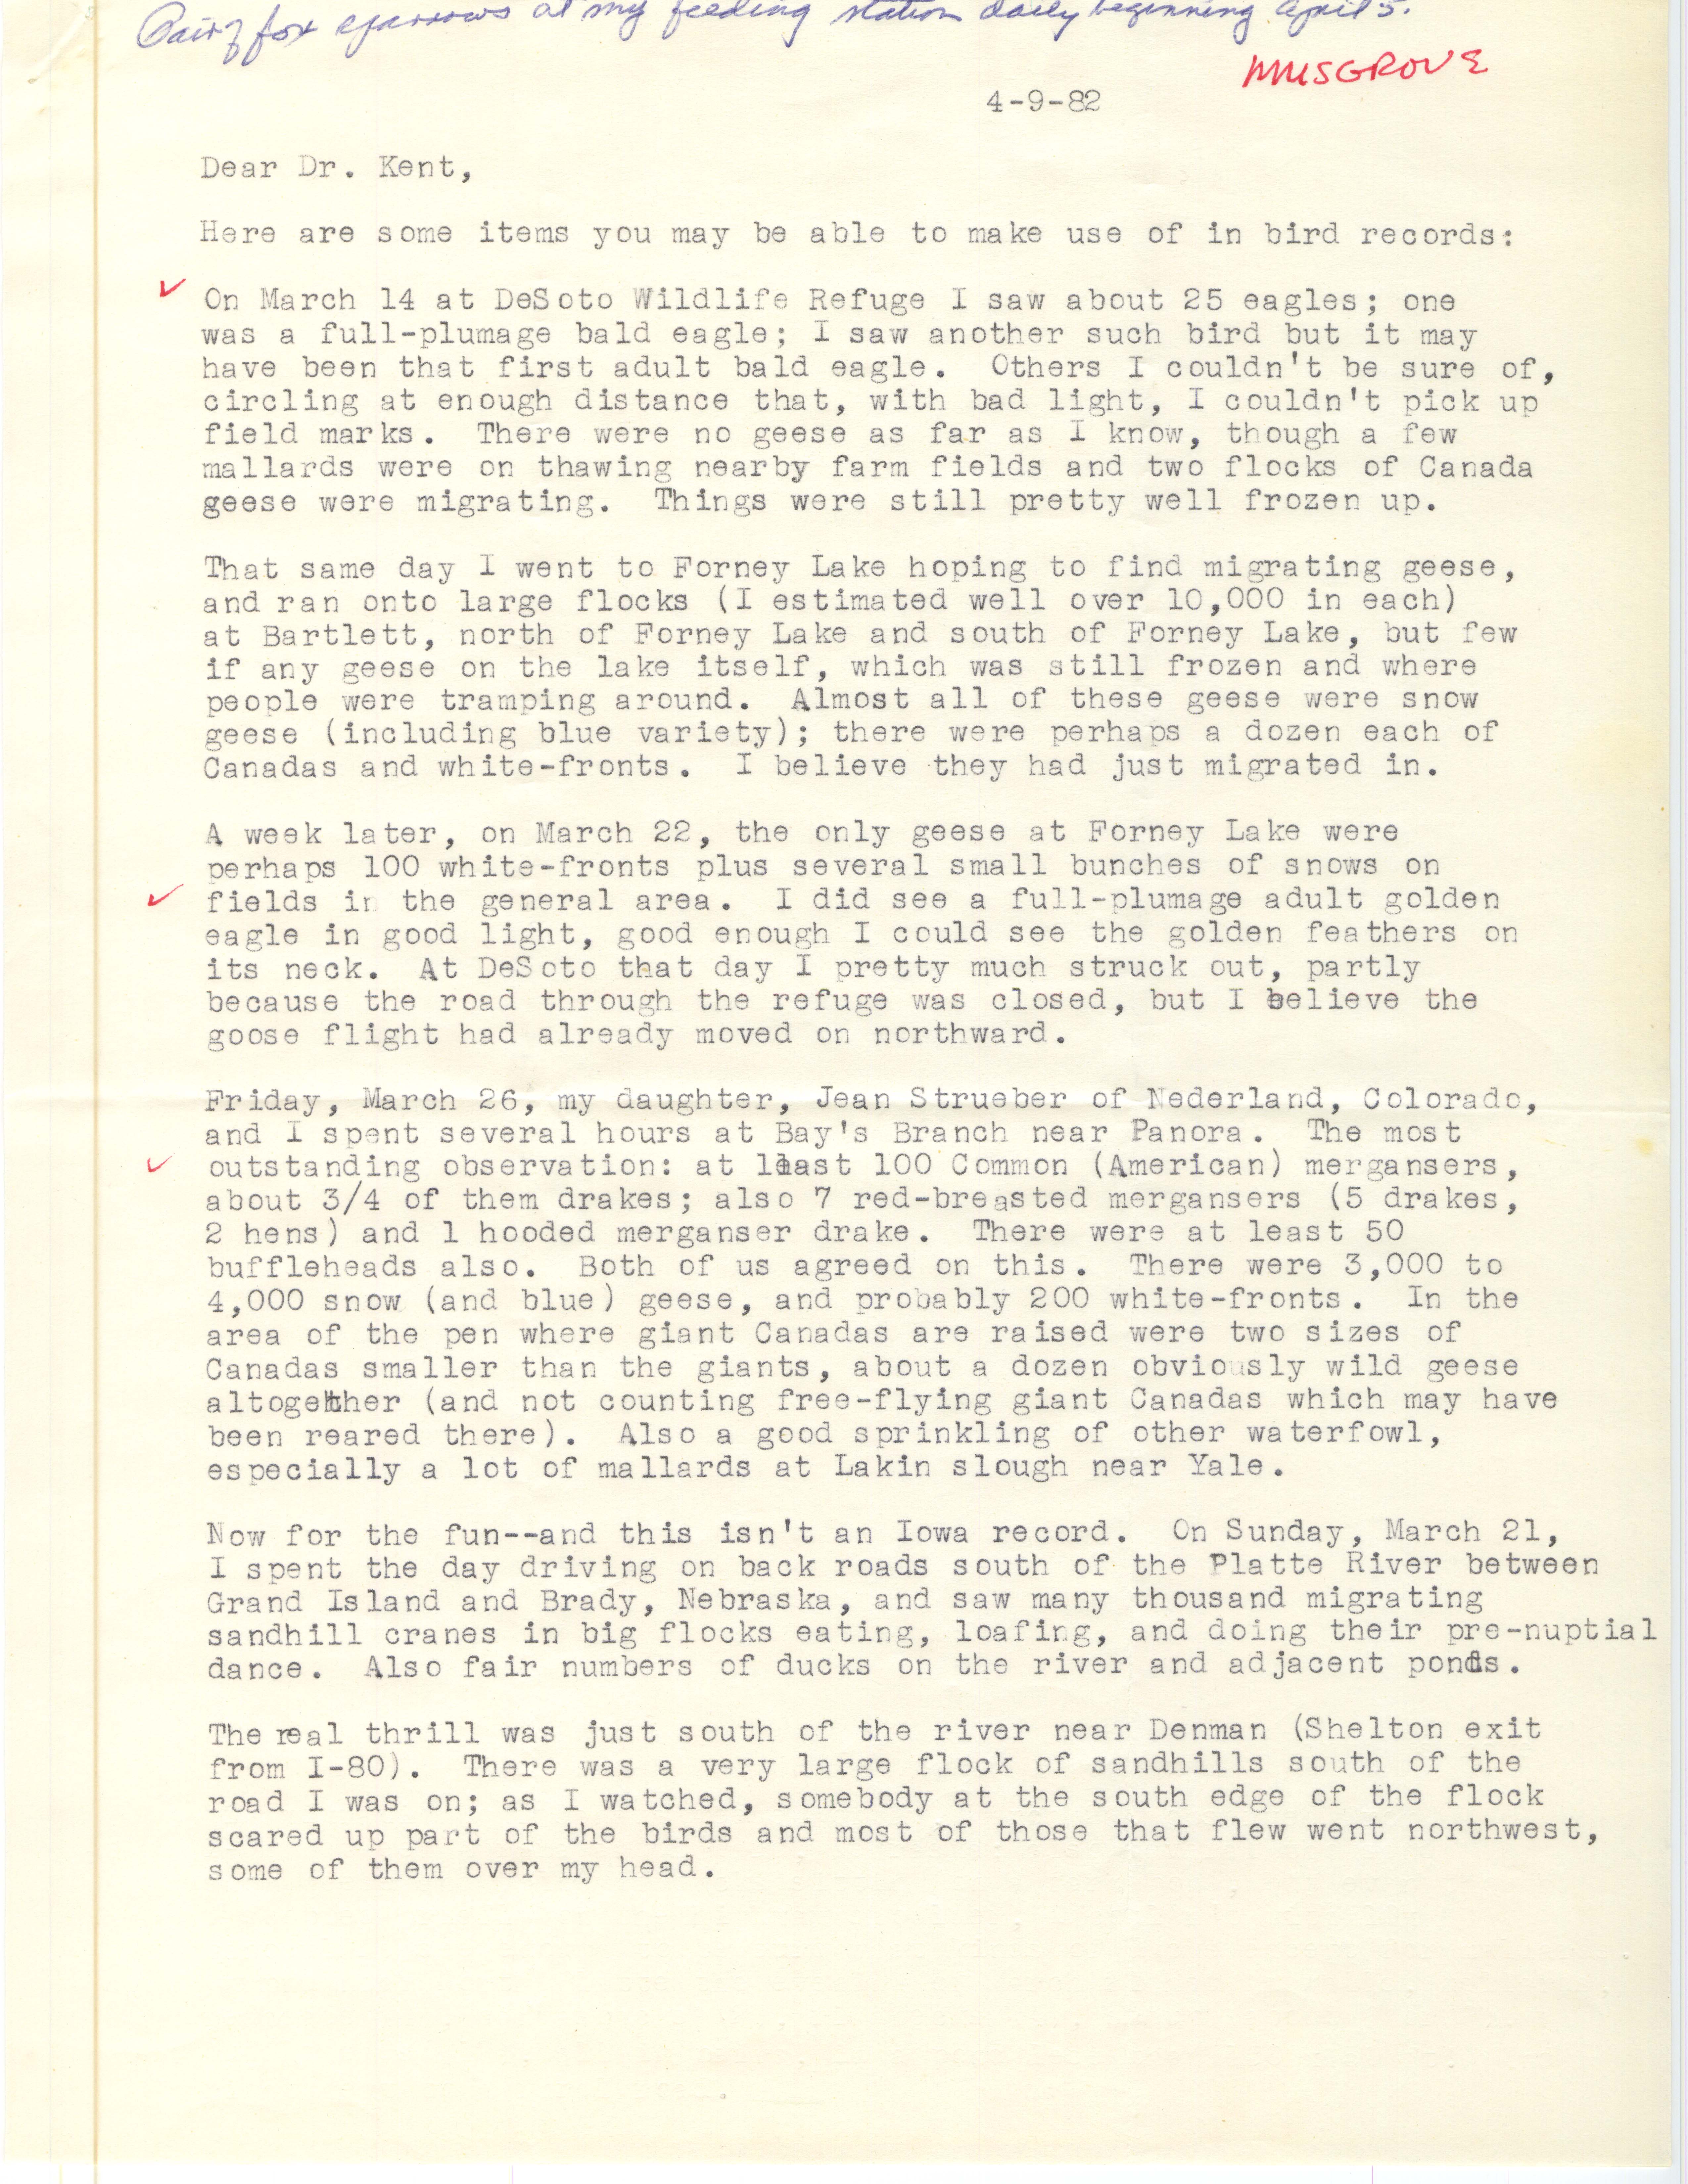 Mary R. Musgrove letter to Thomas H. Kent regarding field notes, April 9, 1982